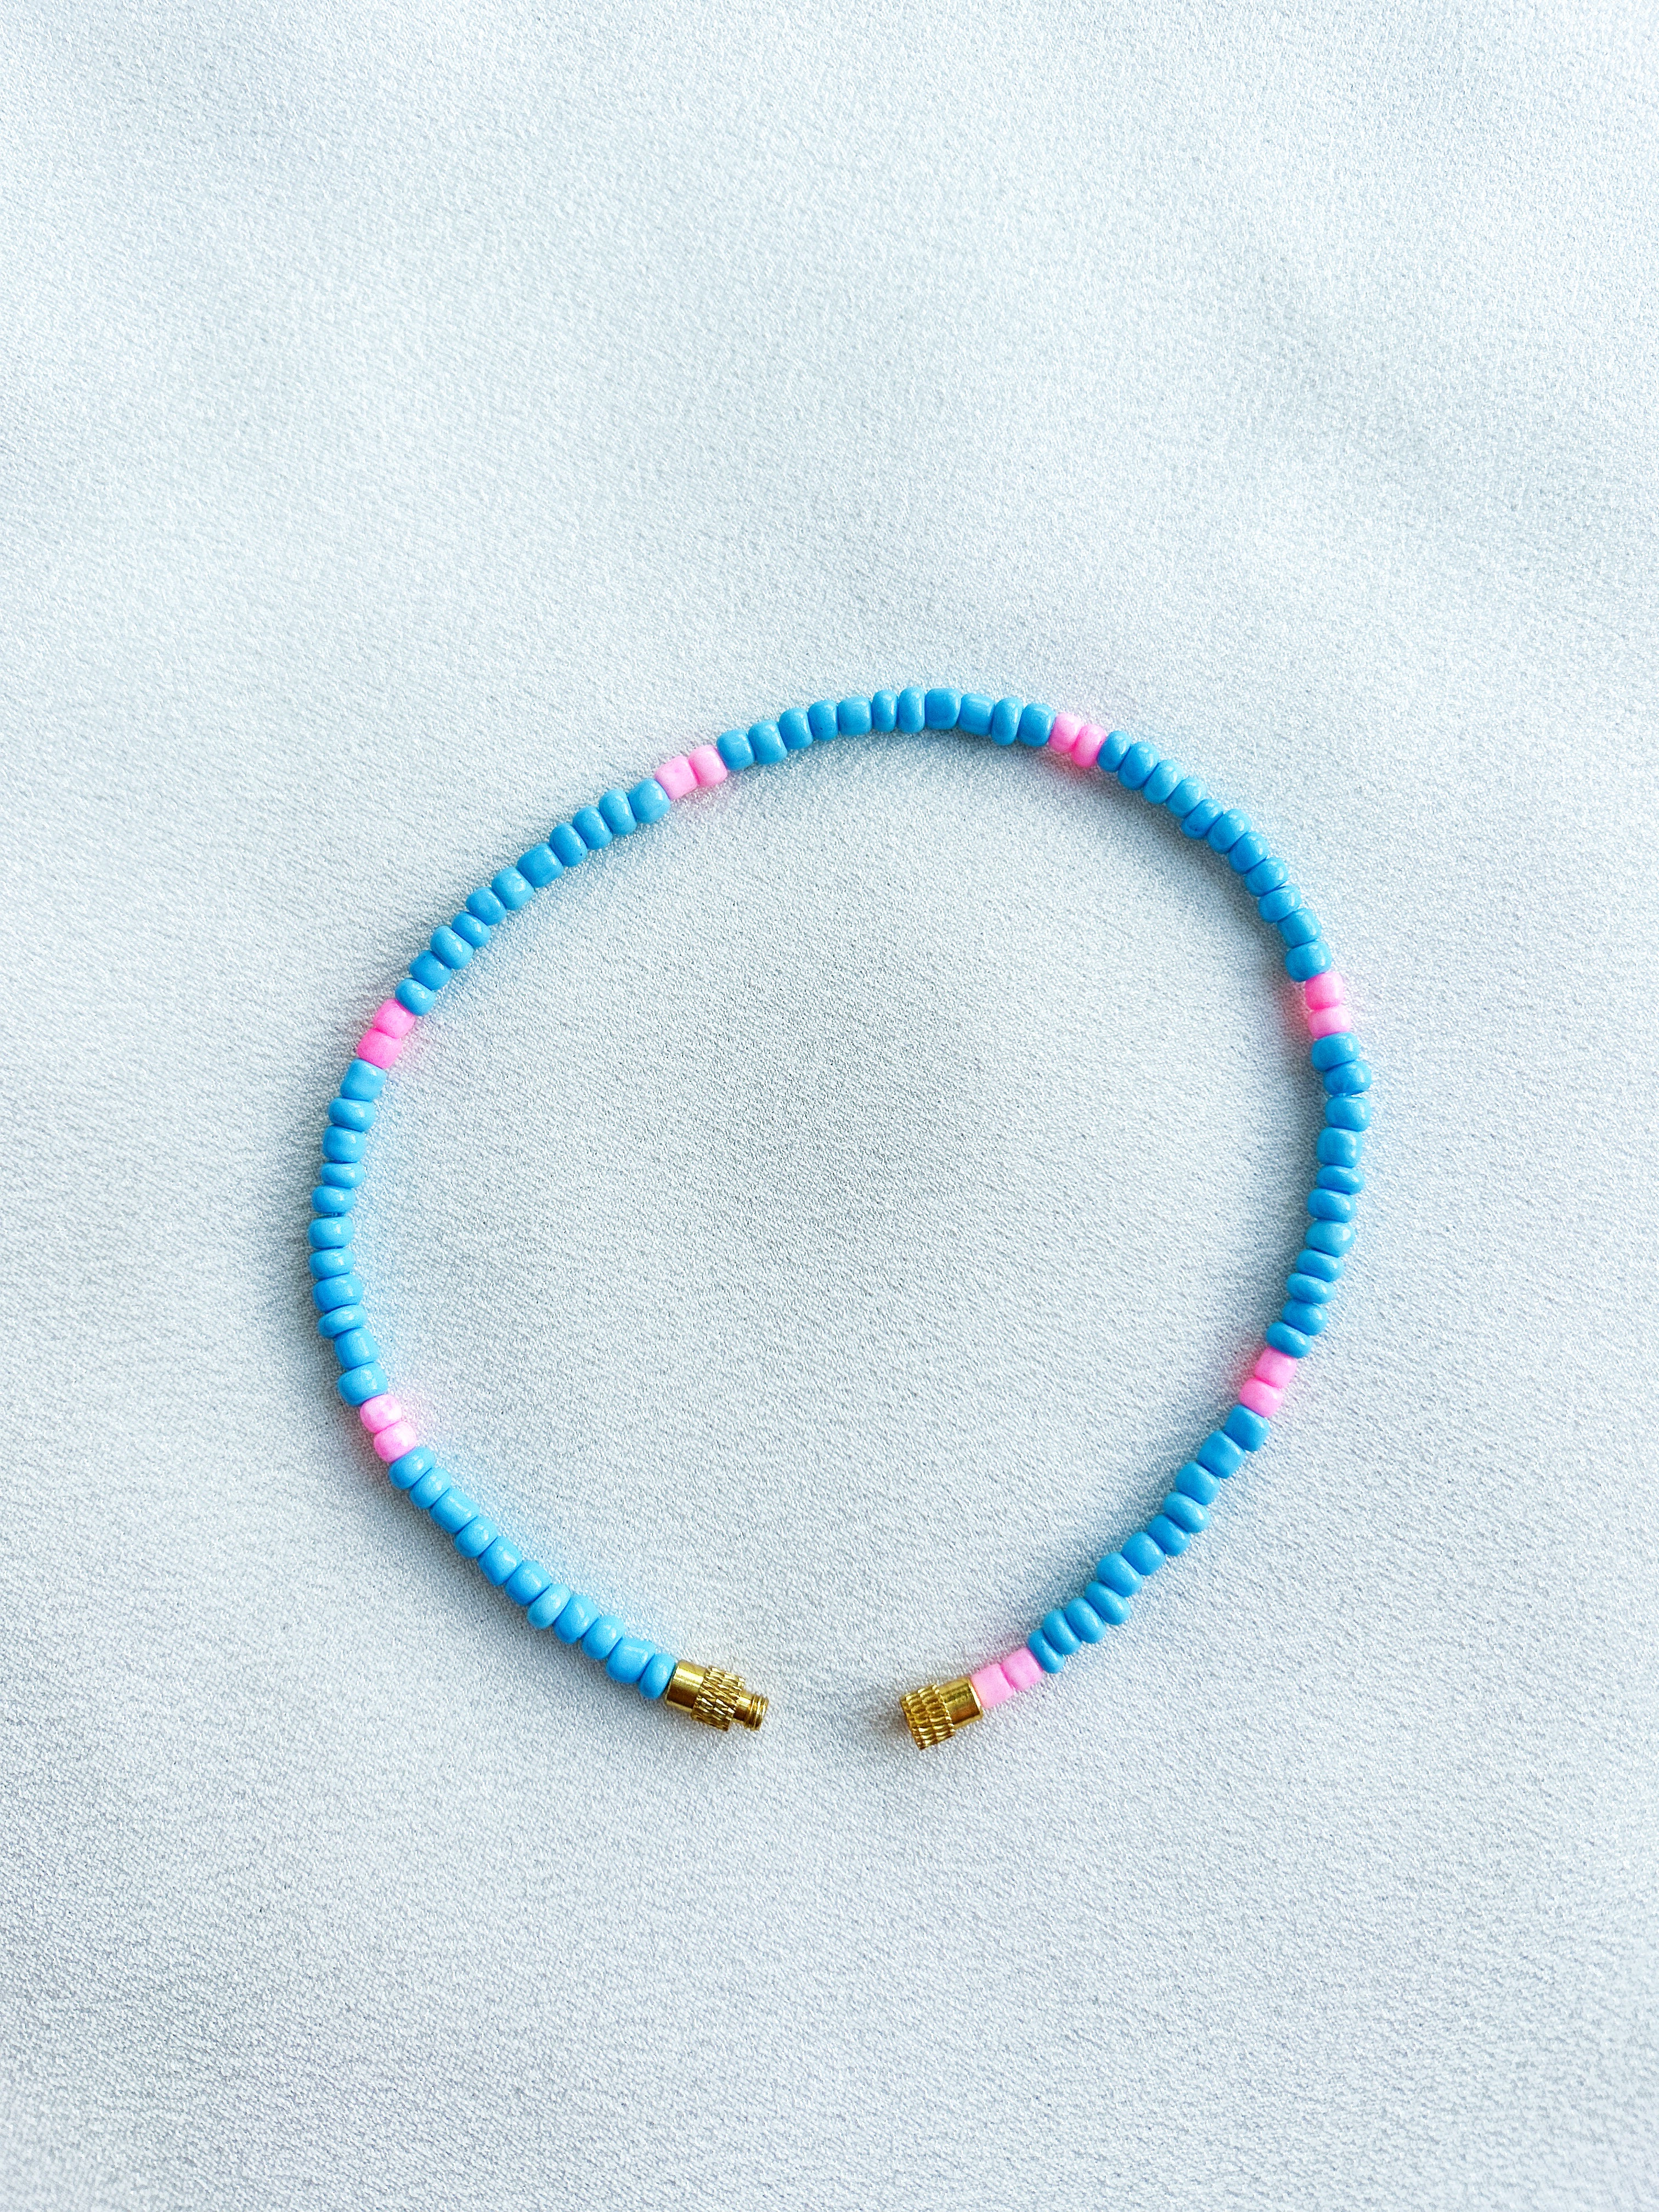 [THE ELEVEN] Anklet/Bracelet: Blue/Pink [Small Beads]